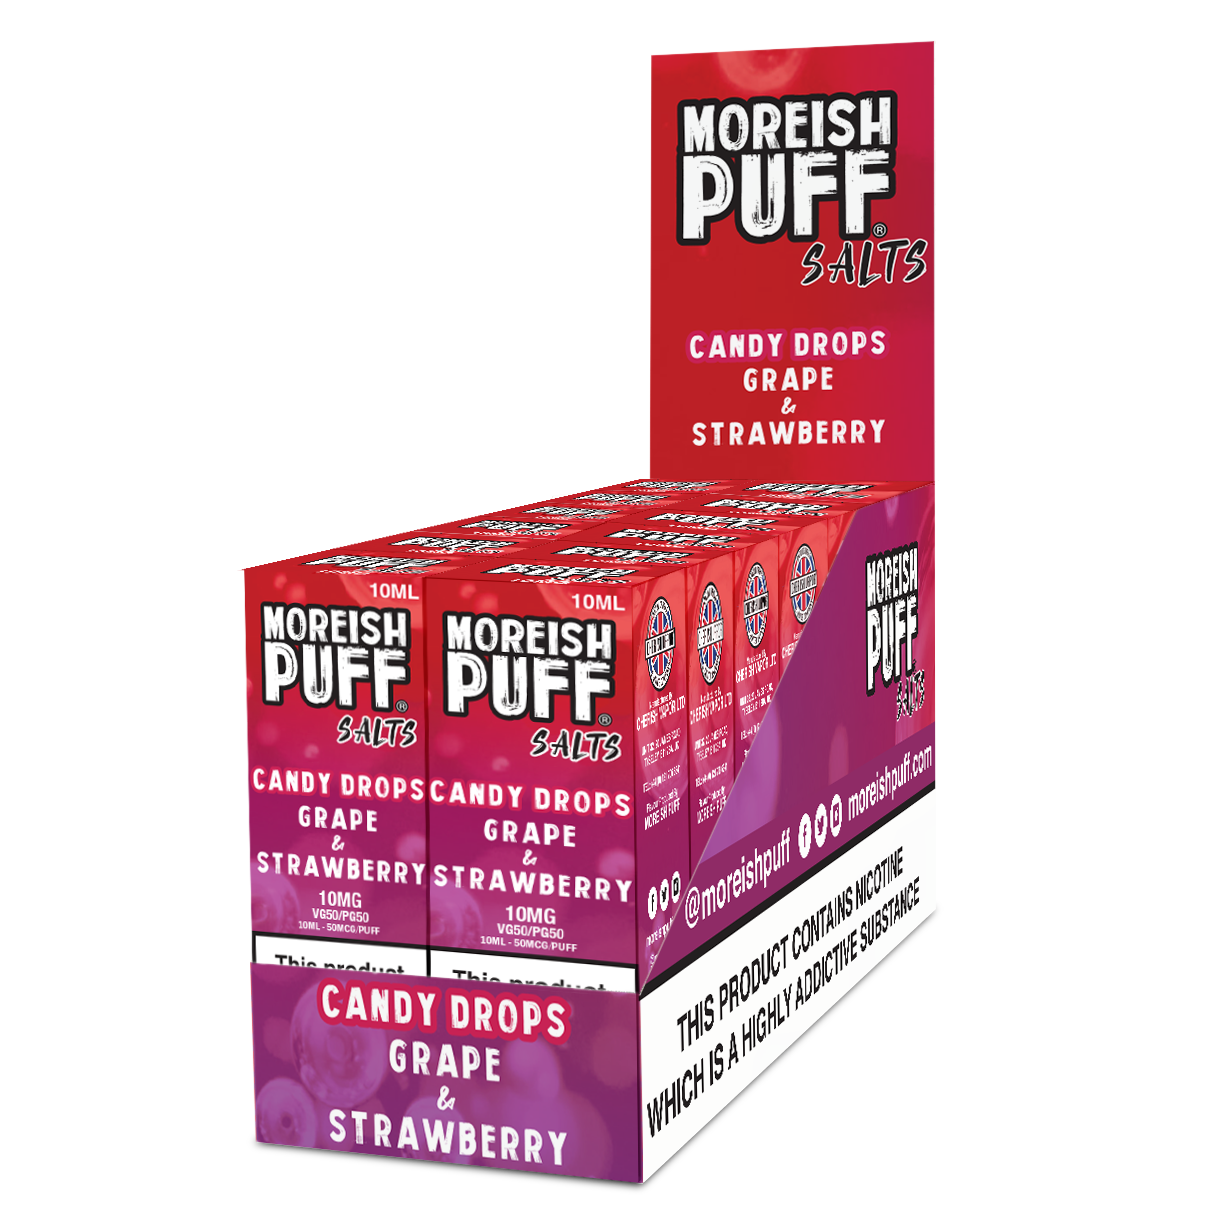 Moreish Puff Candy Drops Nic Salts 10ml Pack of 12